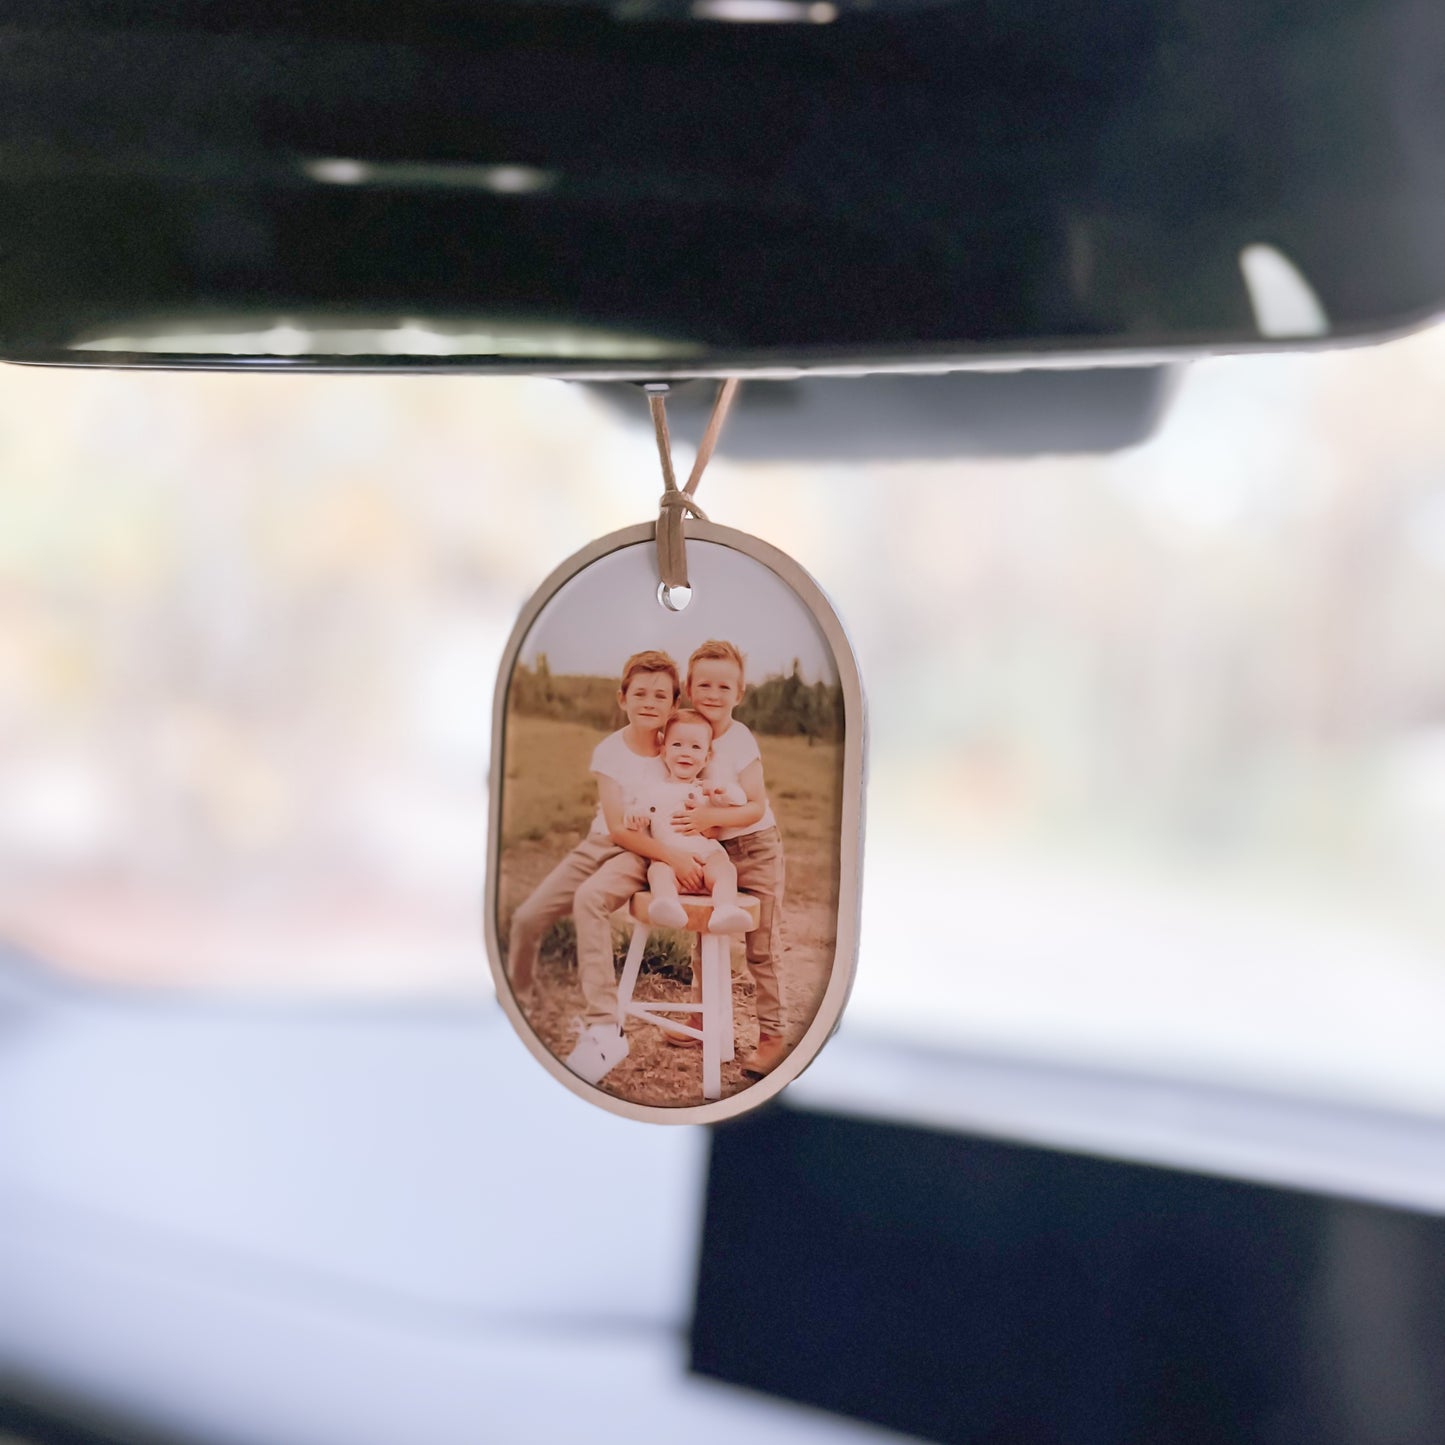 DRIVE SAFE Photo Car Mirror Hanging Accessory | PERSONALISED